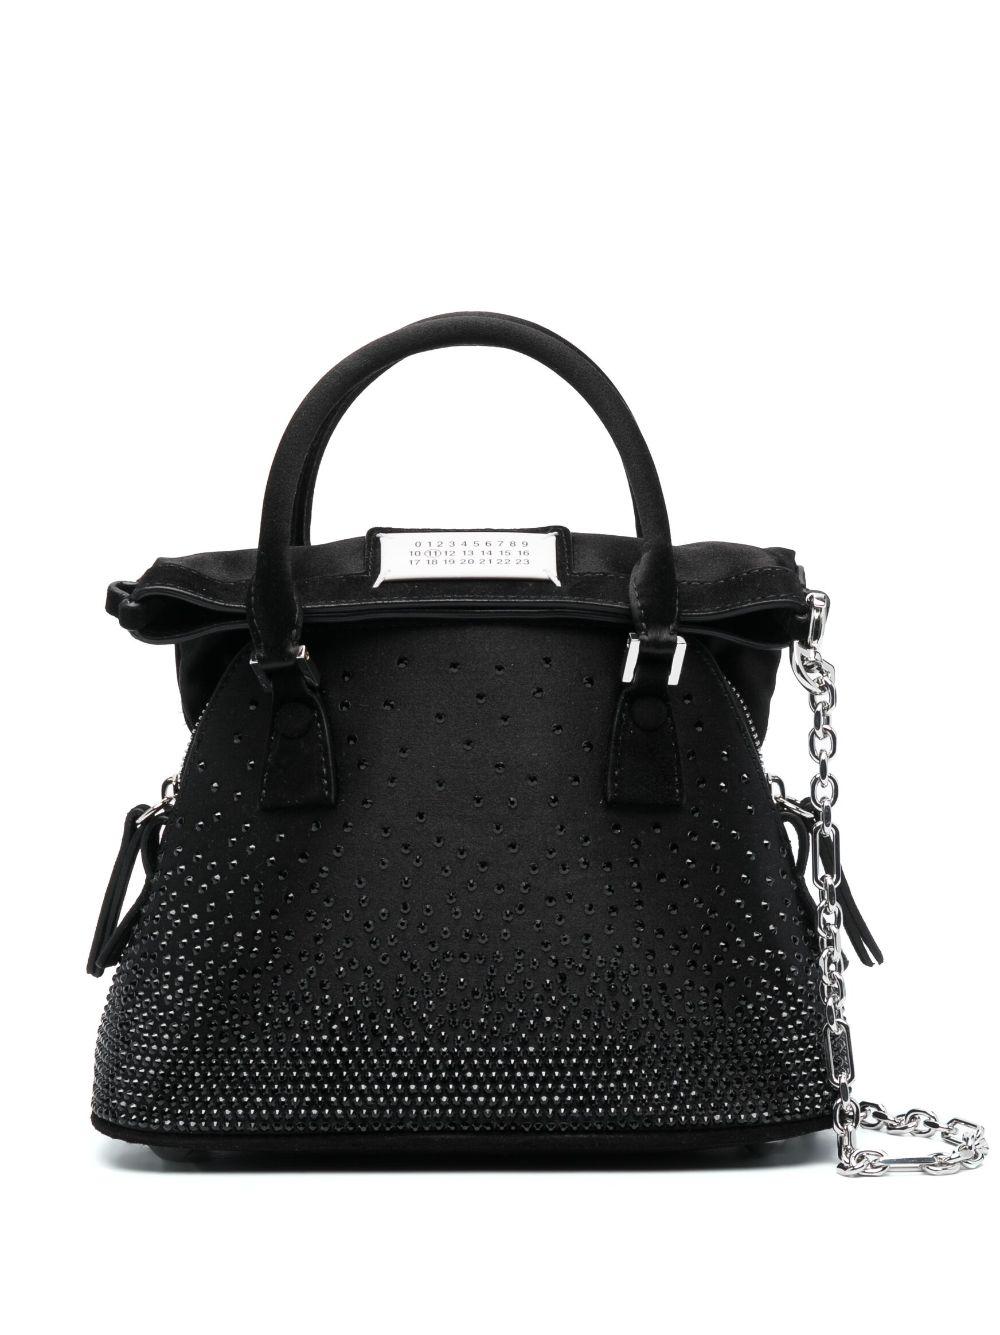 Maison Margiela Micro 5ac Embellished Tote in Black | Lyst